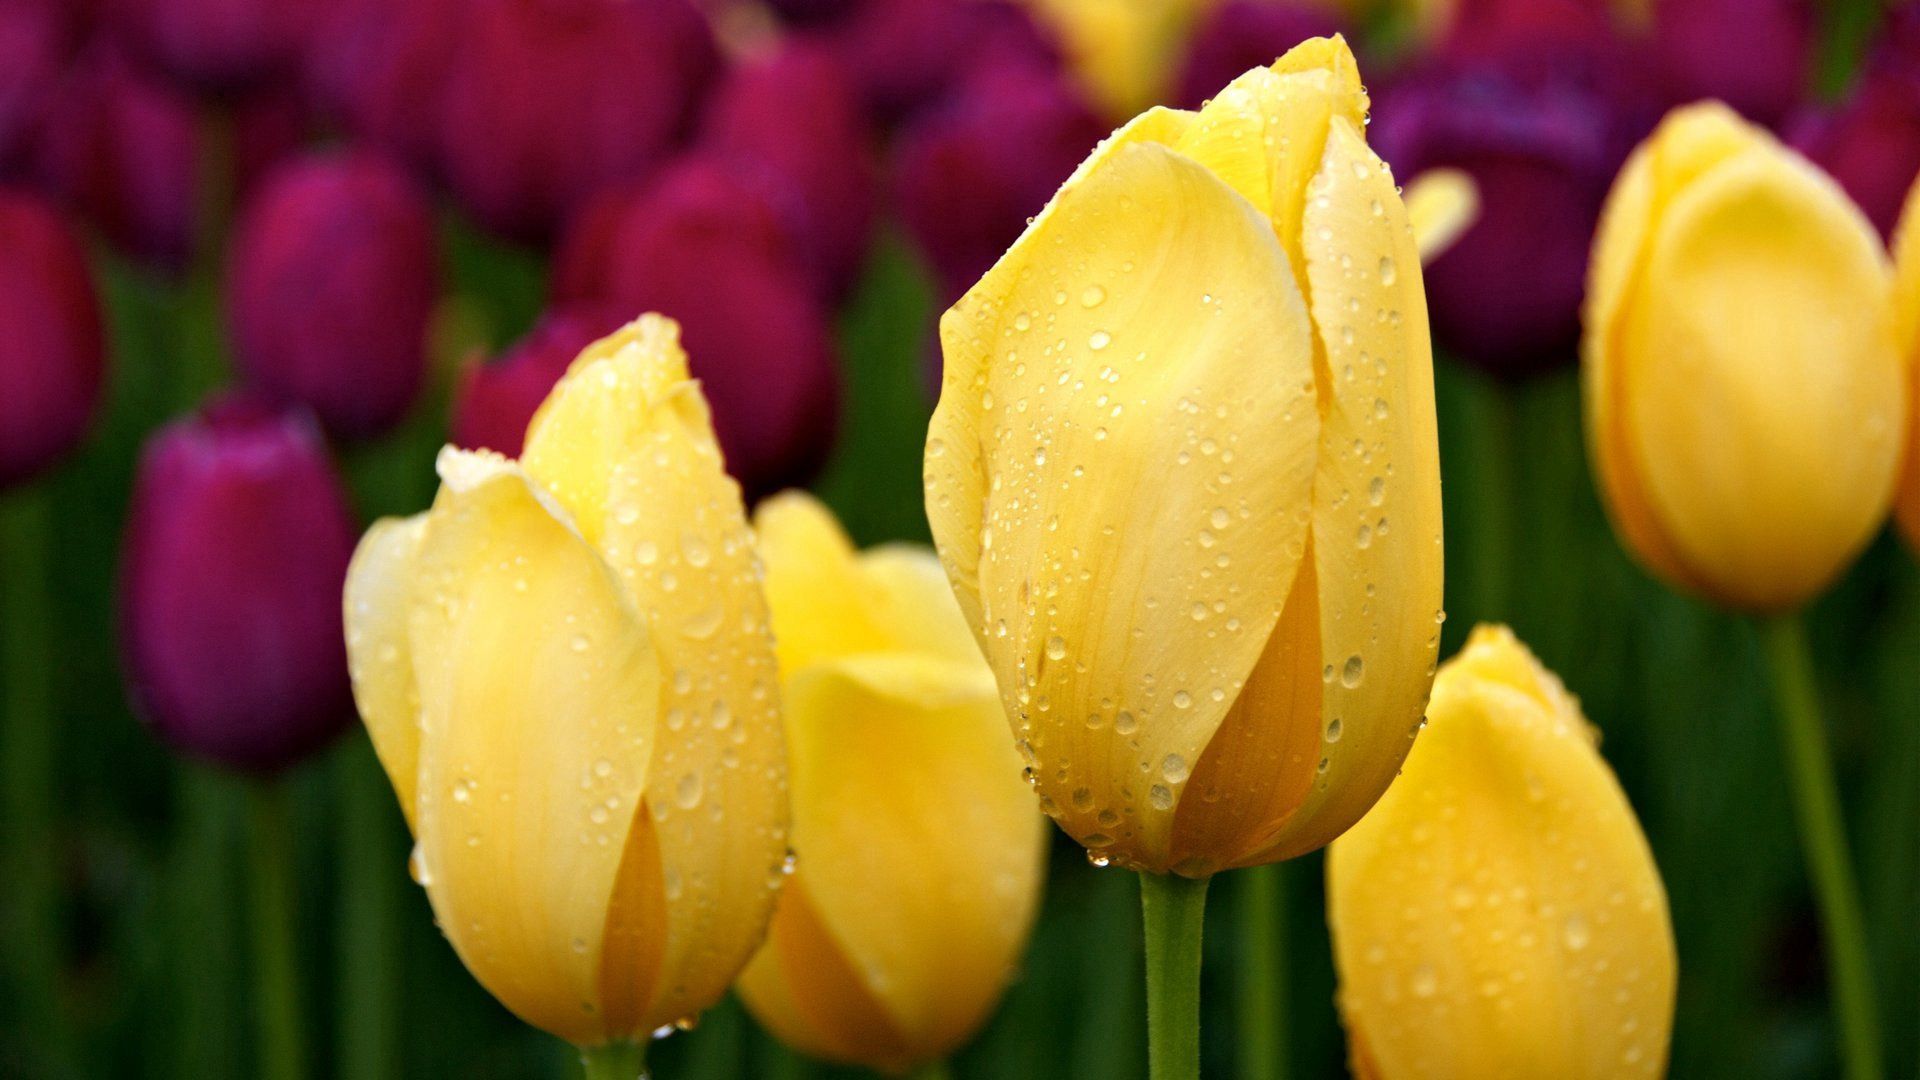 Wallpaper Full HD drops, greens, flowers, tulips, buds, different